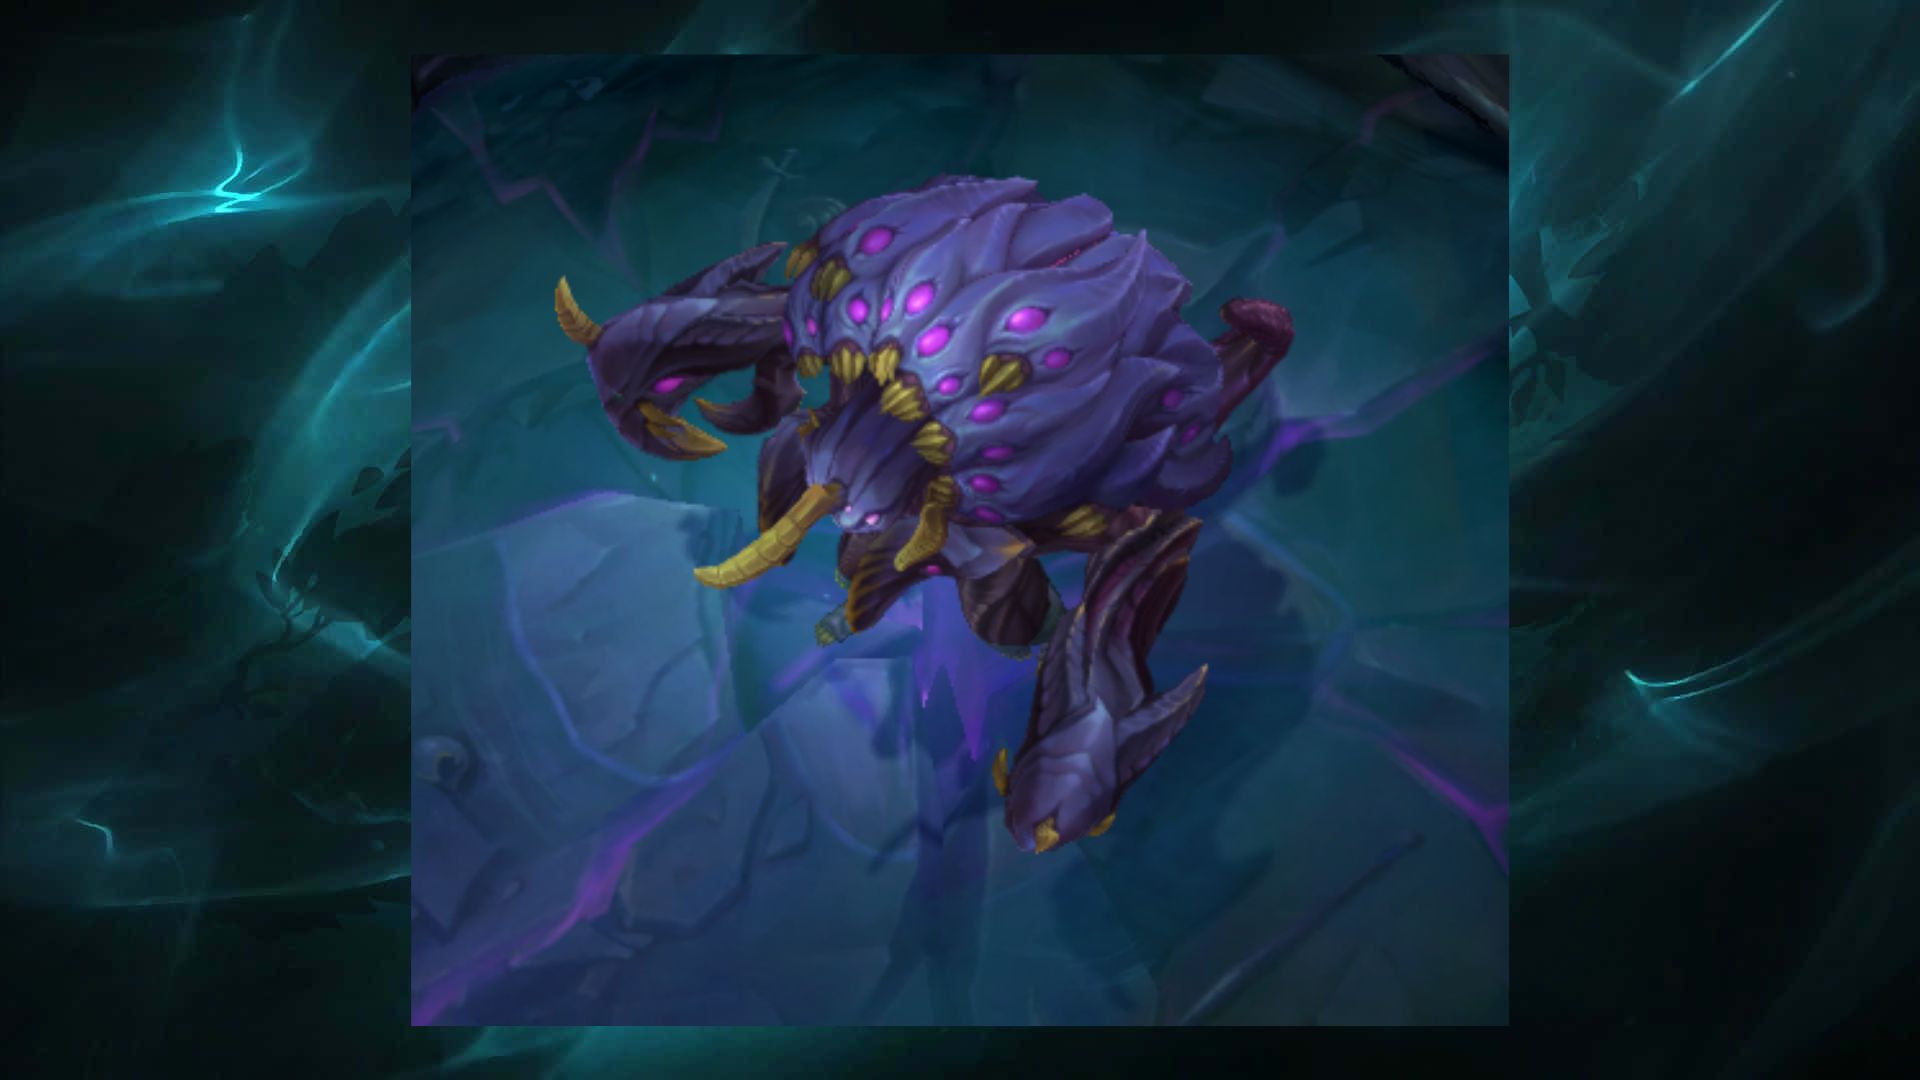 New to League of Legends? Get started with these champions - The Rift Herald